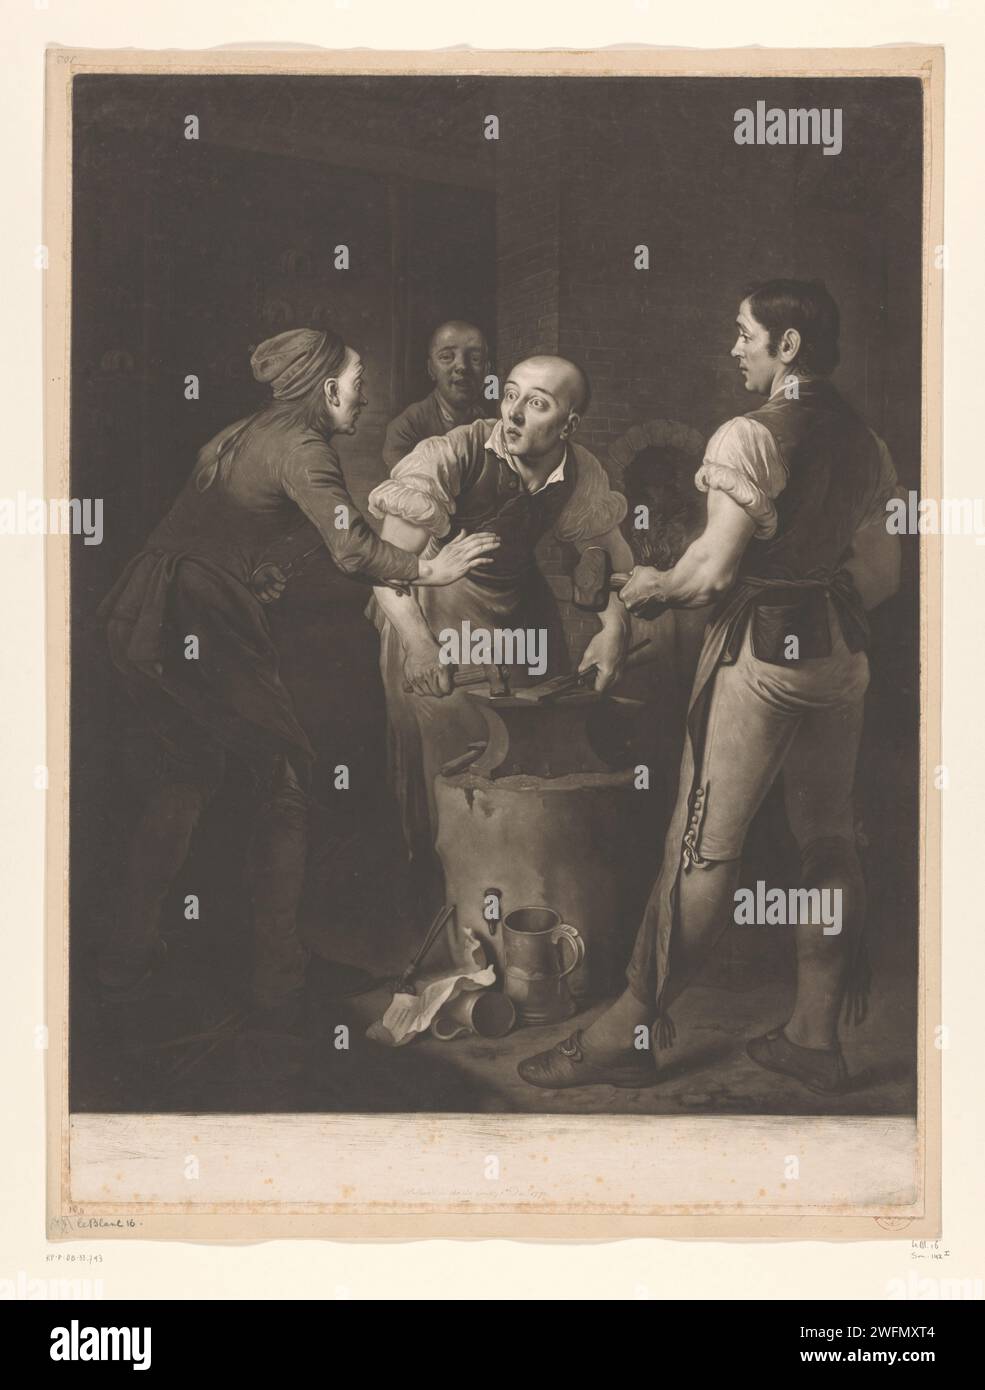 Four men in a forge, Richard Houston, after Edward Penny, 1770 print  London paper  smith, blacksmith. forging (industrial process). slander Stock Photo